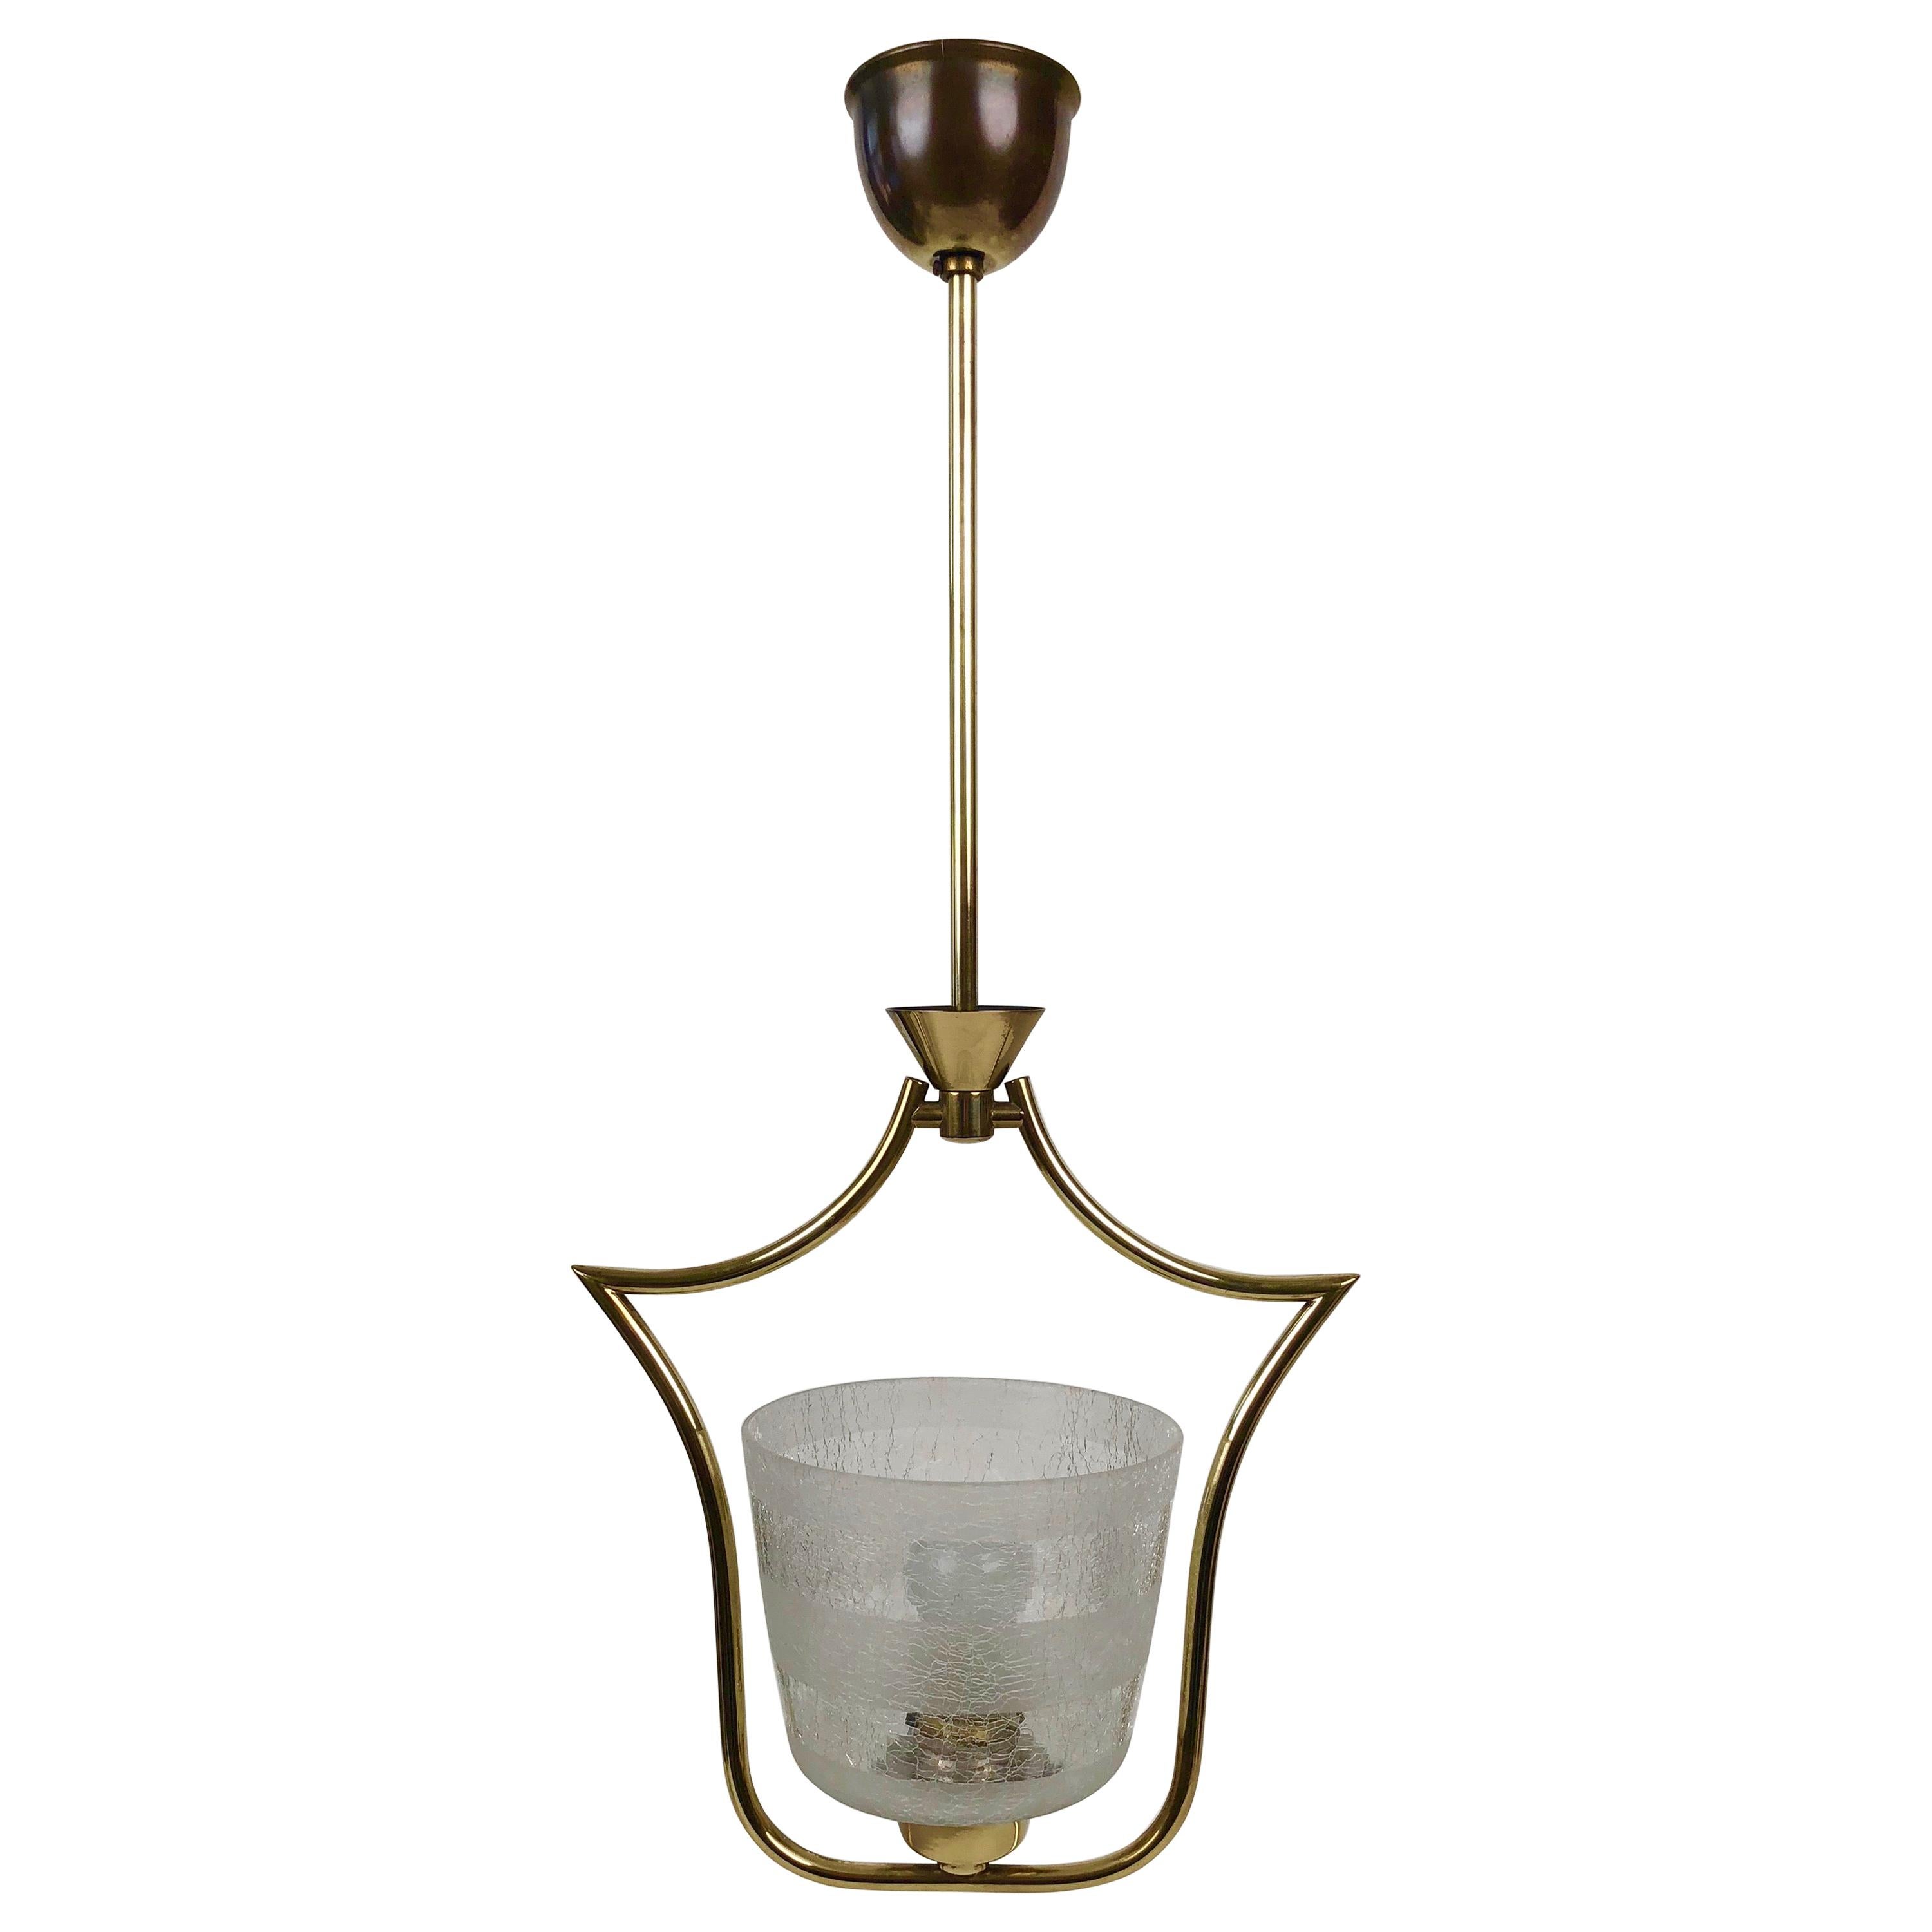 Hollywood Regency Styled Pendant Lamp in Brass and Glass, from Austria, 1950s For Sale